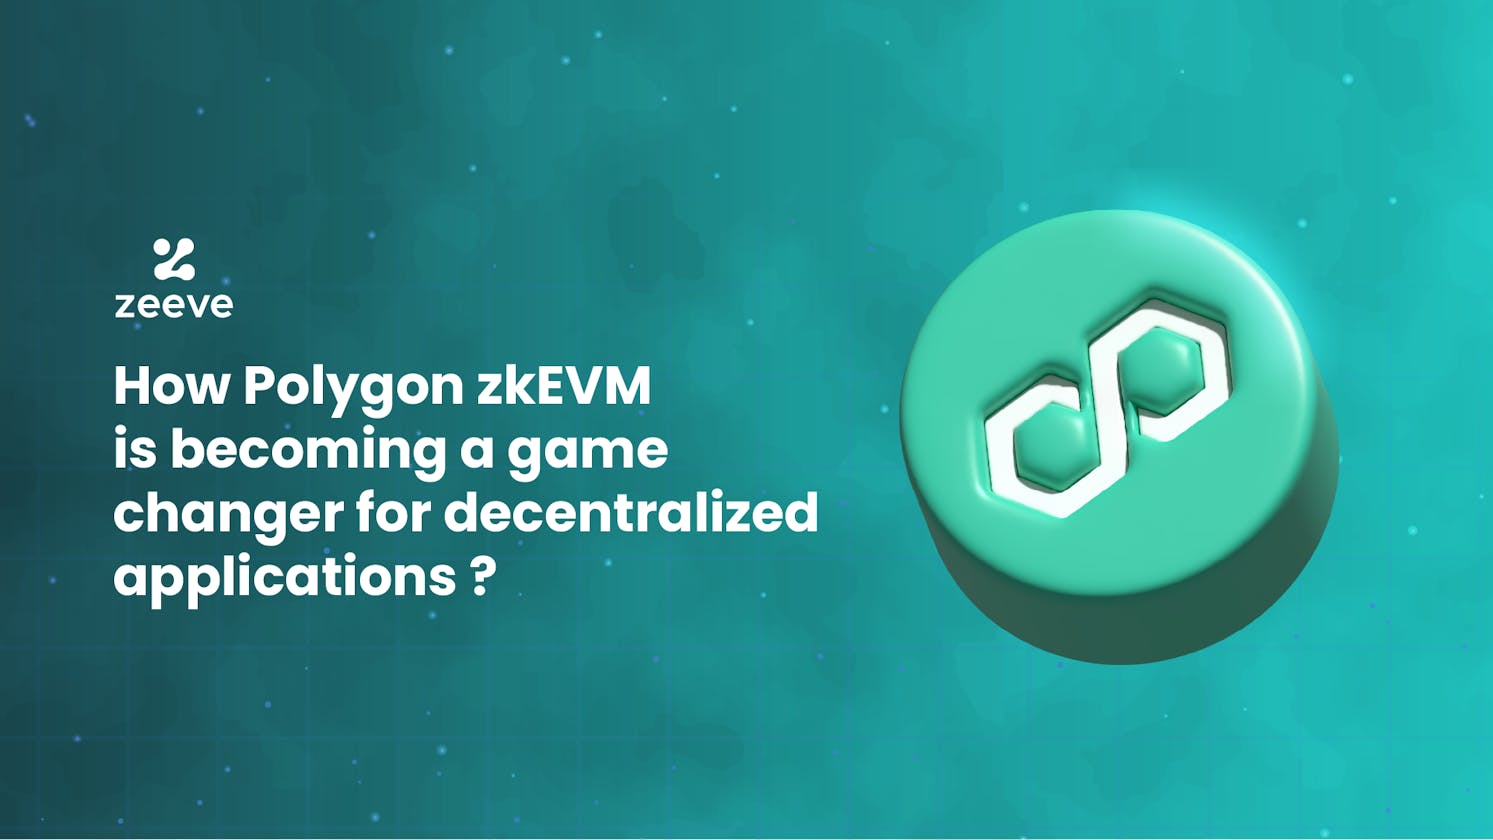 How Polygon zkEVM is becoming a game changer for decentralized applications?